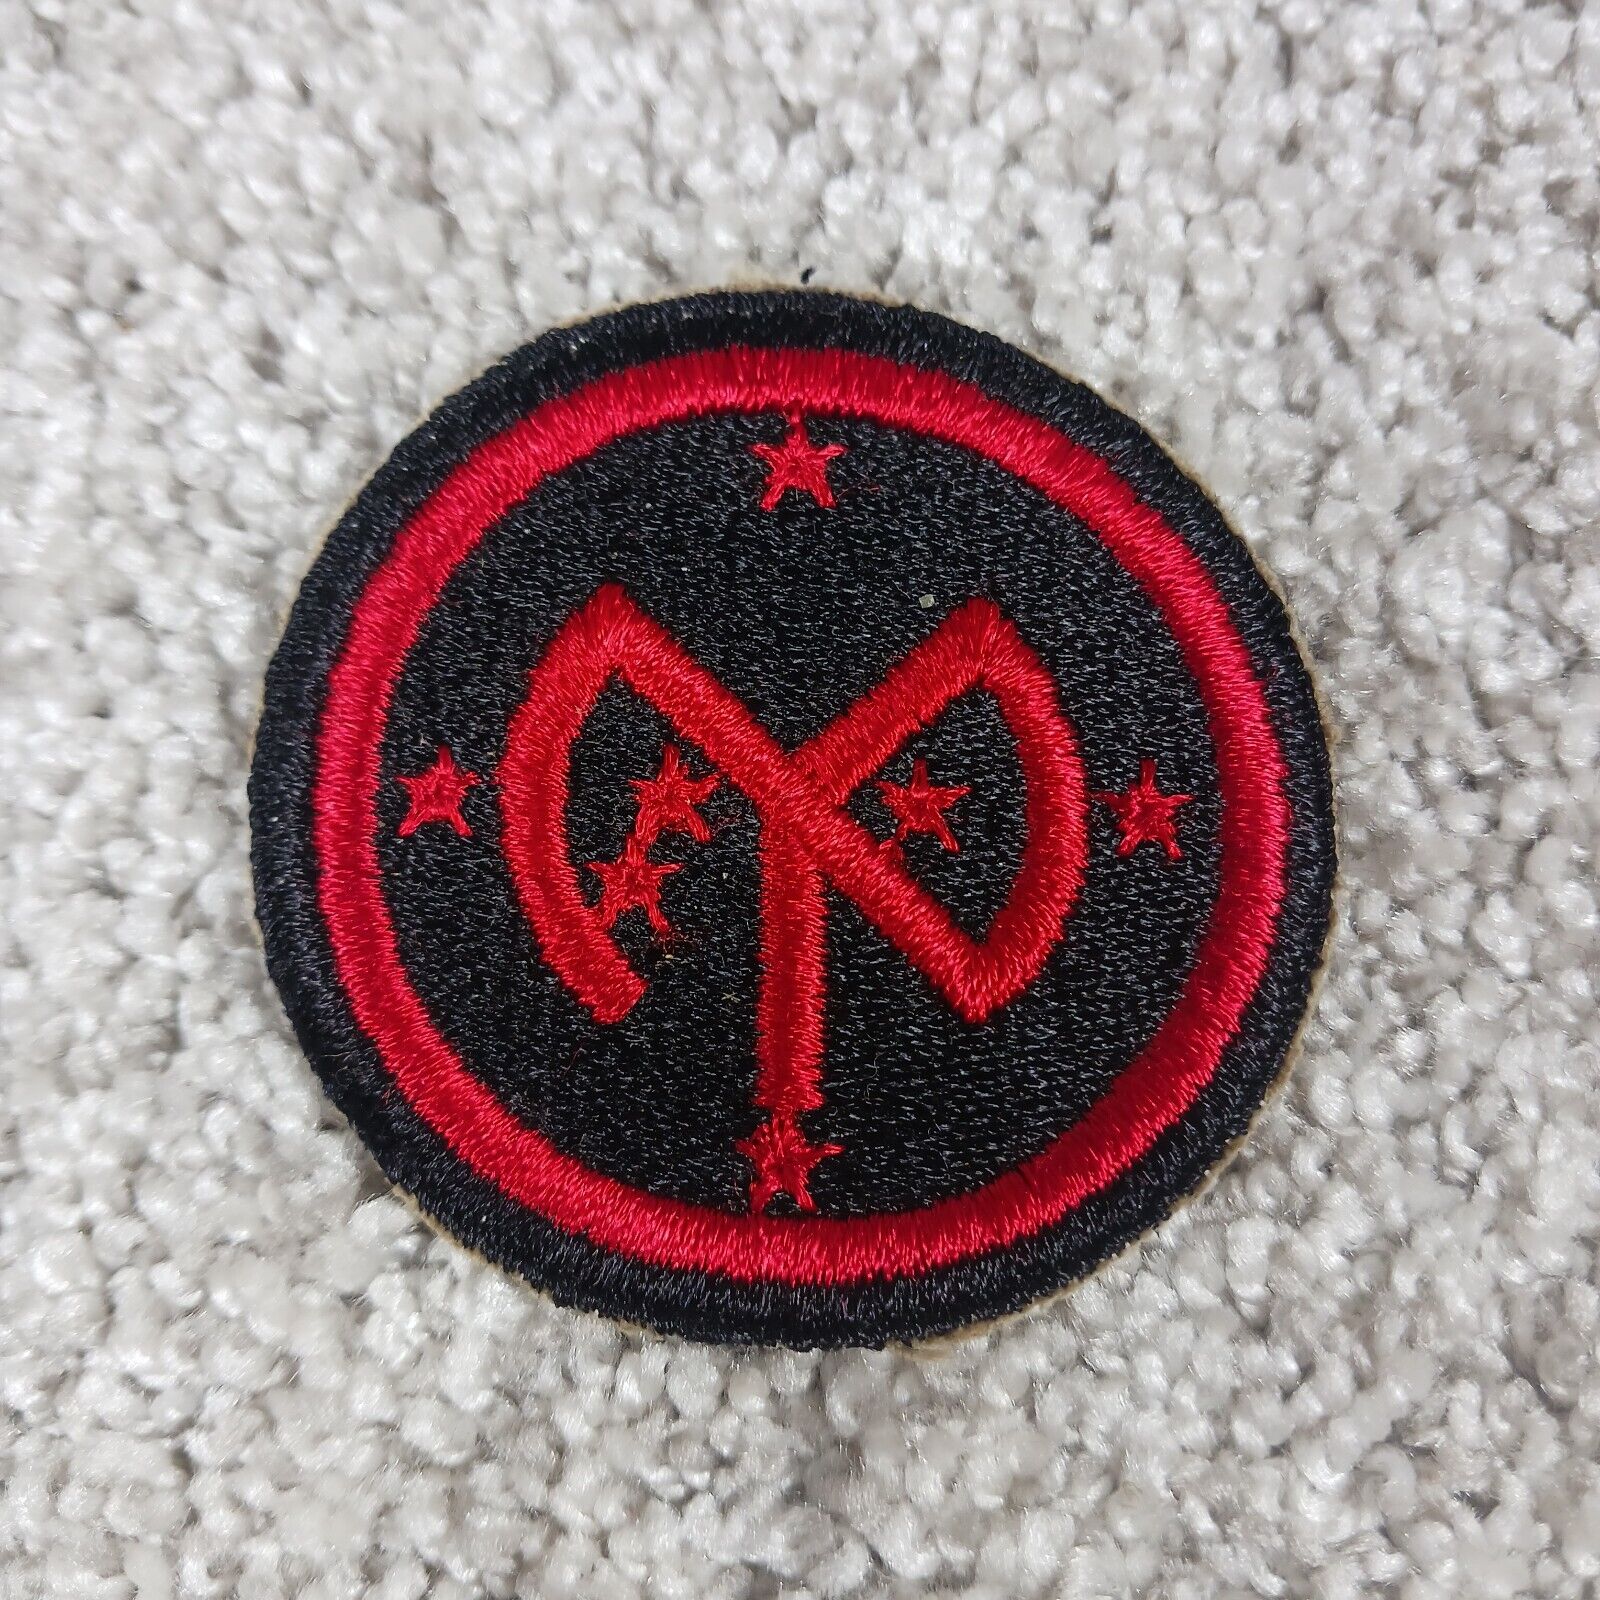 Vintage 27th Infantry Division Patch New York NY NG Roughnecks WWII VTG Original